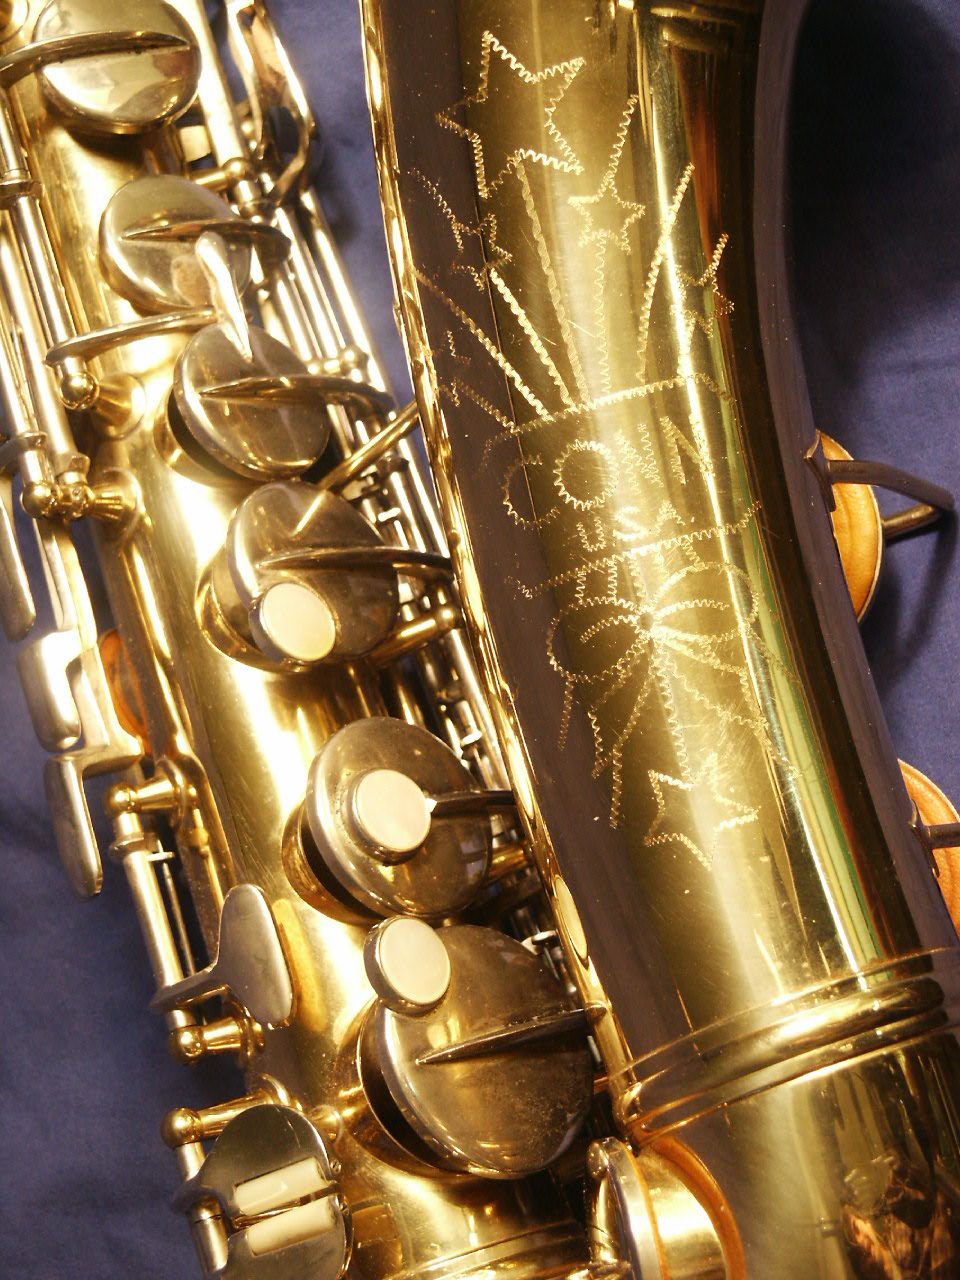 Conn saxophone serial numbers and value